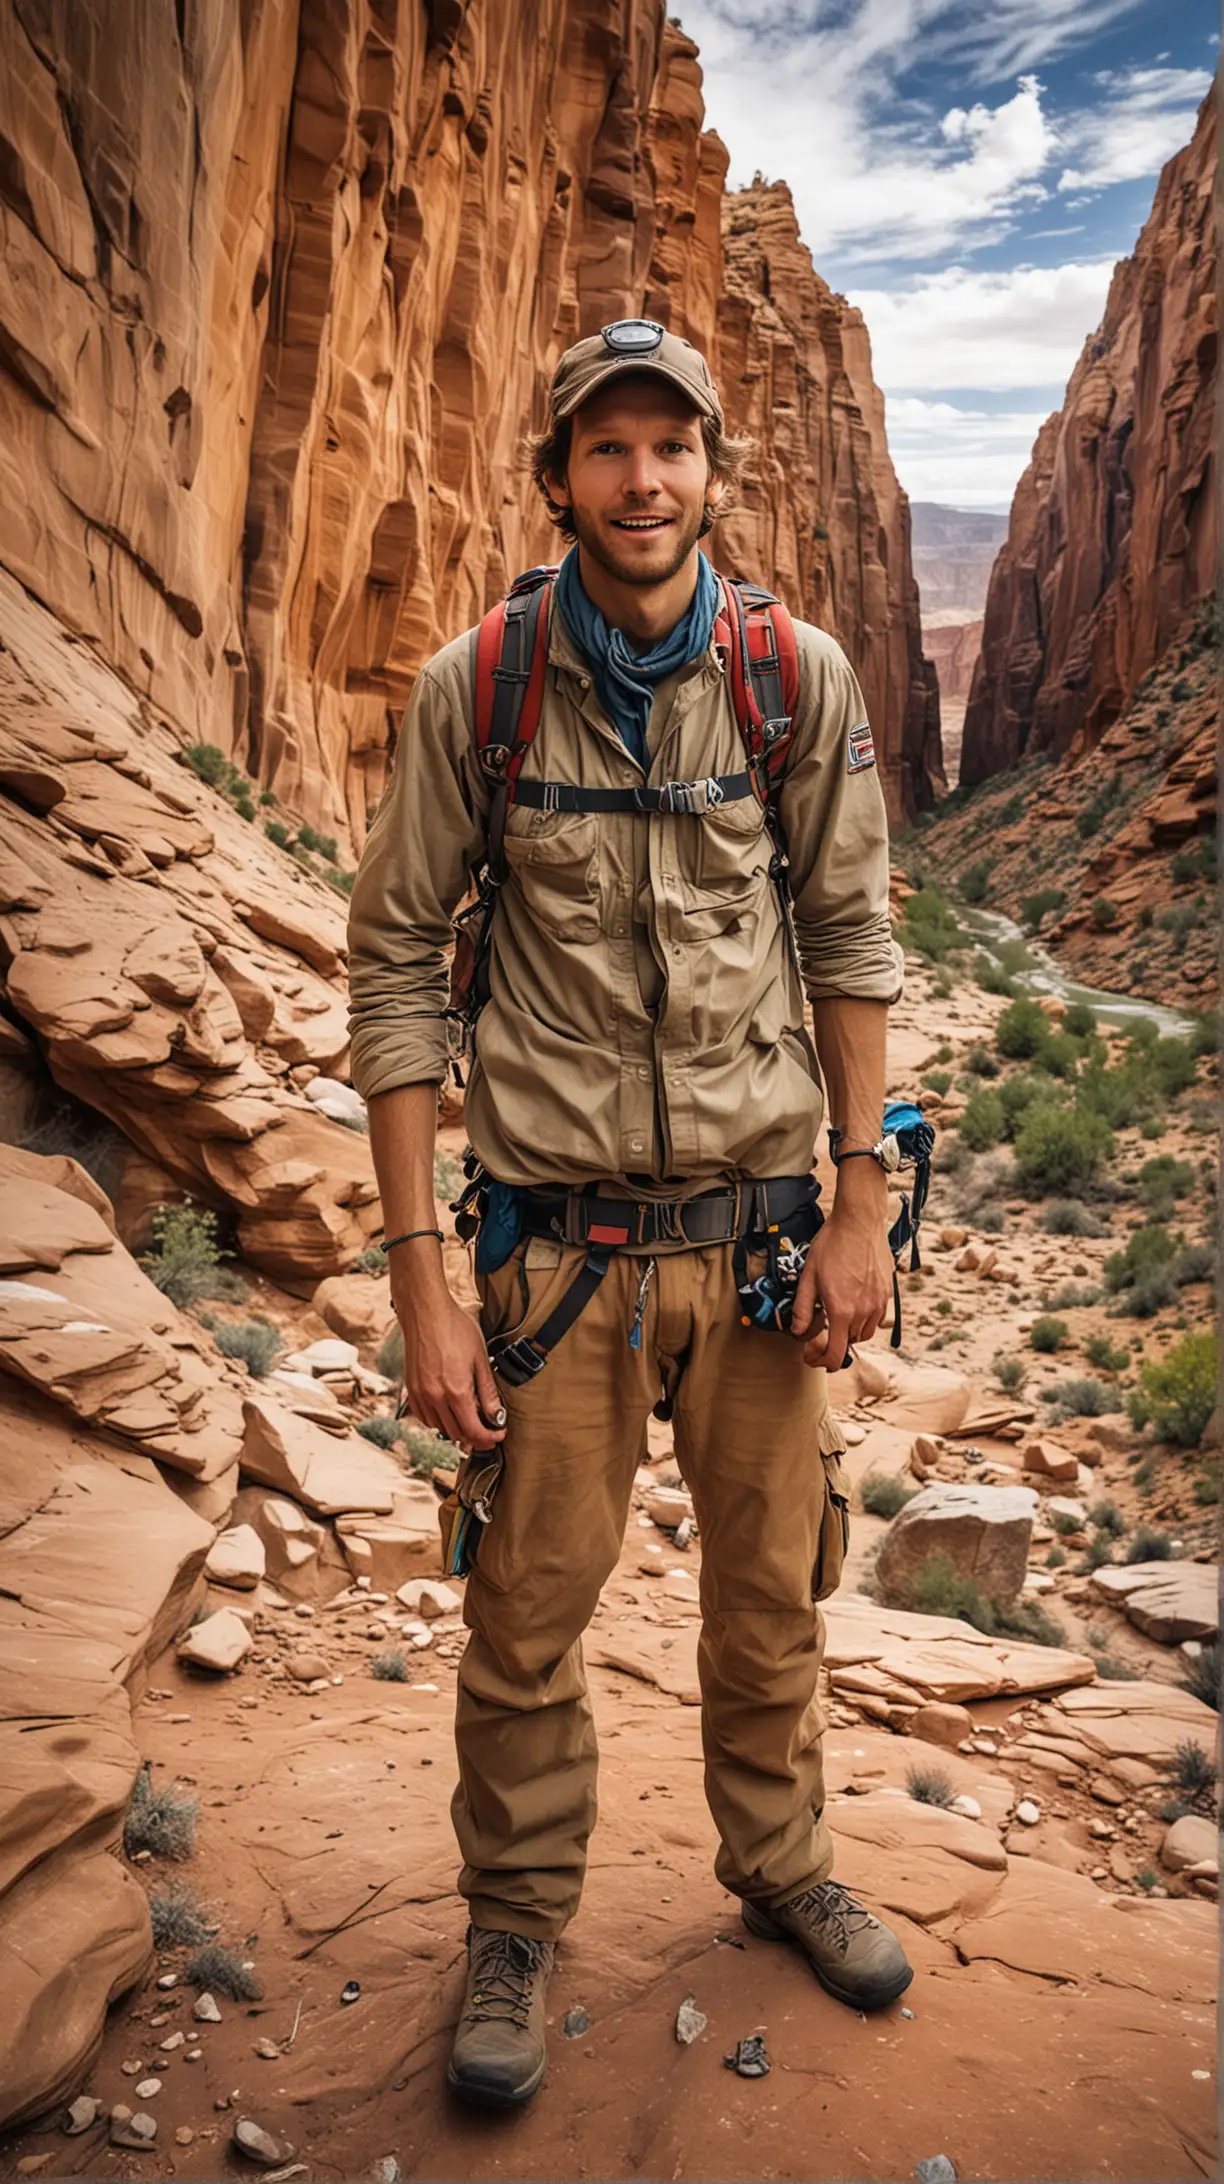 Create an image of 27-year-old American climber Aron Ralston standing at the entrance of a majestic, rugged canyon in Utah. The sky is clear, and he is equipped with hiking gear, looking excited and ready for his adventure.